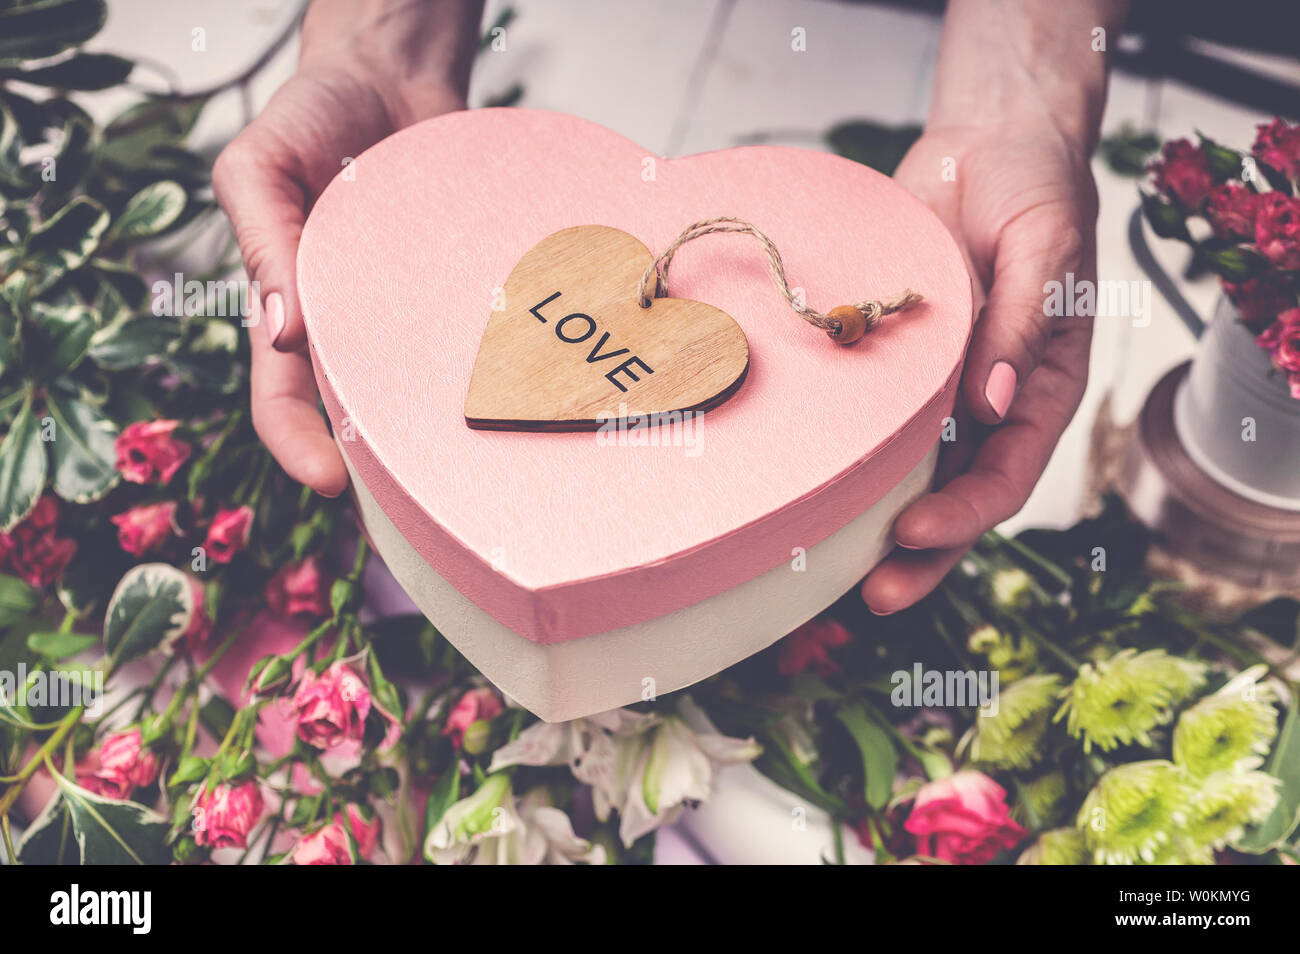 Florist's workplace: flowers, accessories, tools. Female hands holding a gift box in the shape of a heart. Stock Photo